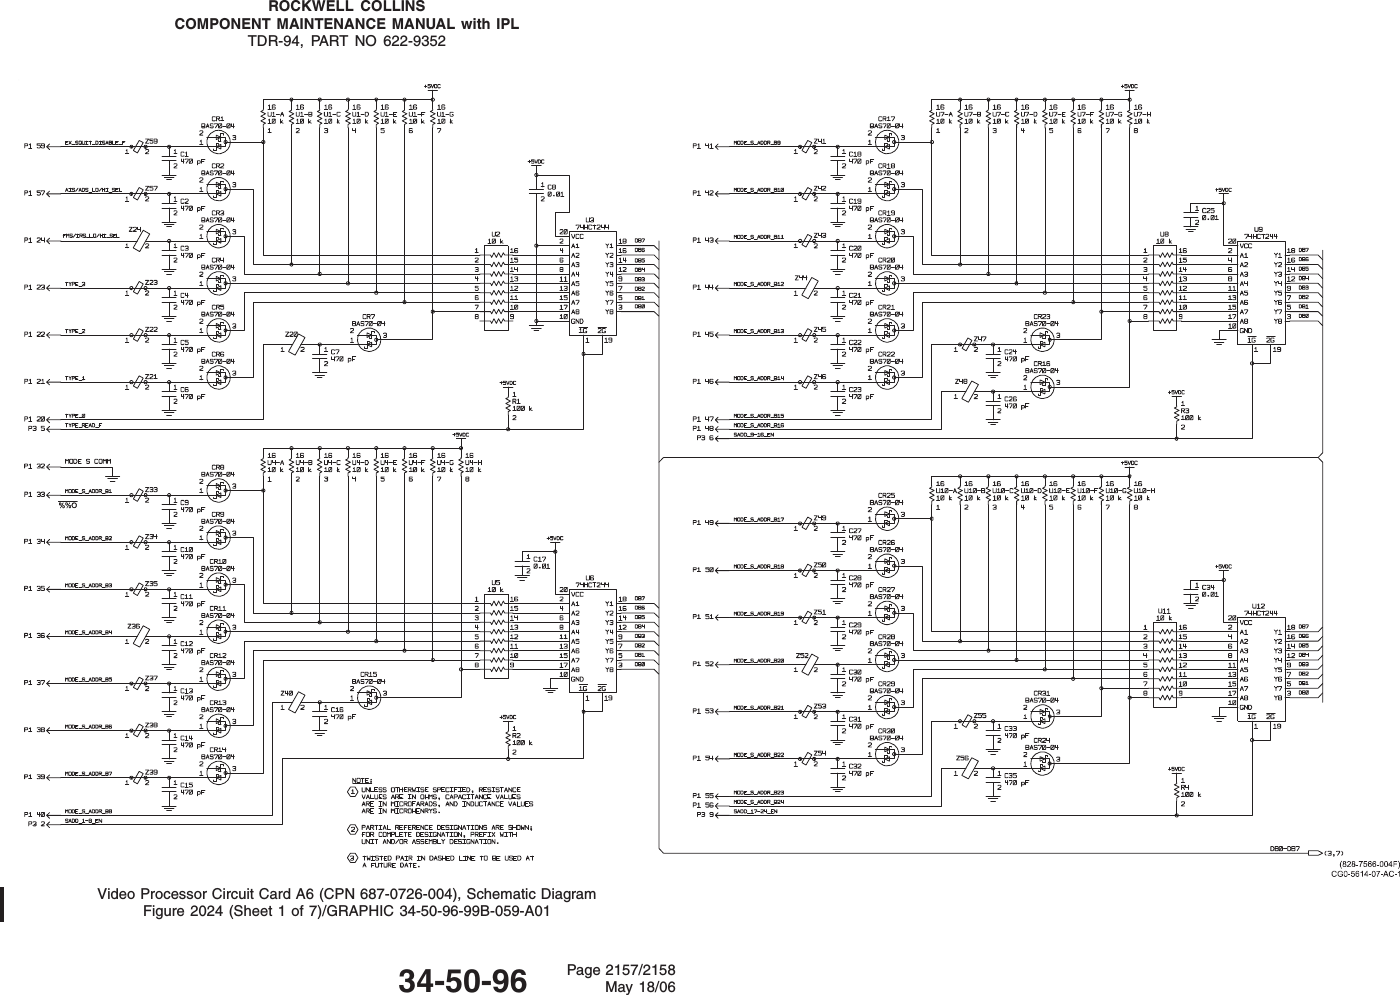 ROCKWELL COLLINSCOMPONENT MAINTENANCE MANUAL with IPLTDR-94, PART NO 622-9352Video Processor Circuit Card A6 (CPN 687-0726-004), Schematic DiagramFigure 2024 (Sheet 1 of 7)/GRAPHIC 34-50-96-99B-059-A0134-50-96 Page 2157/2158May 18/06